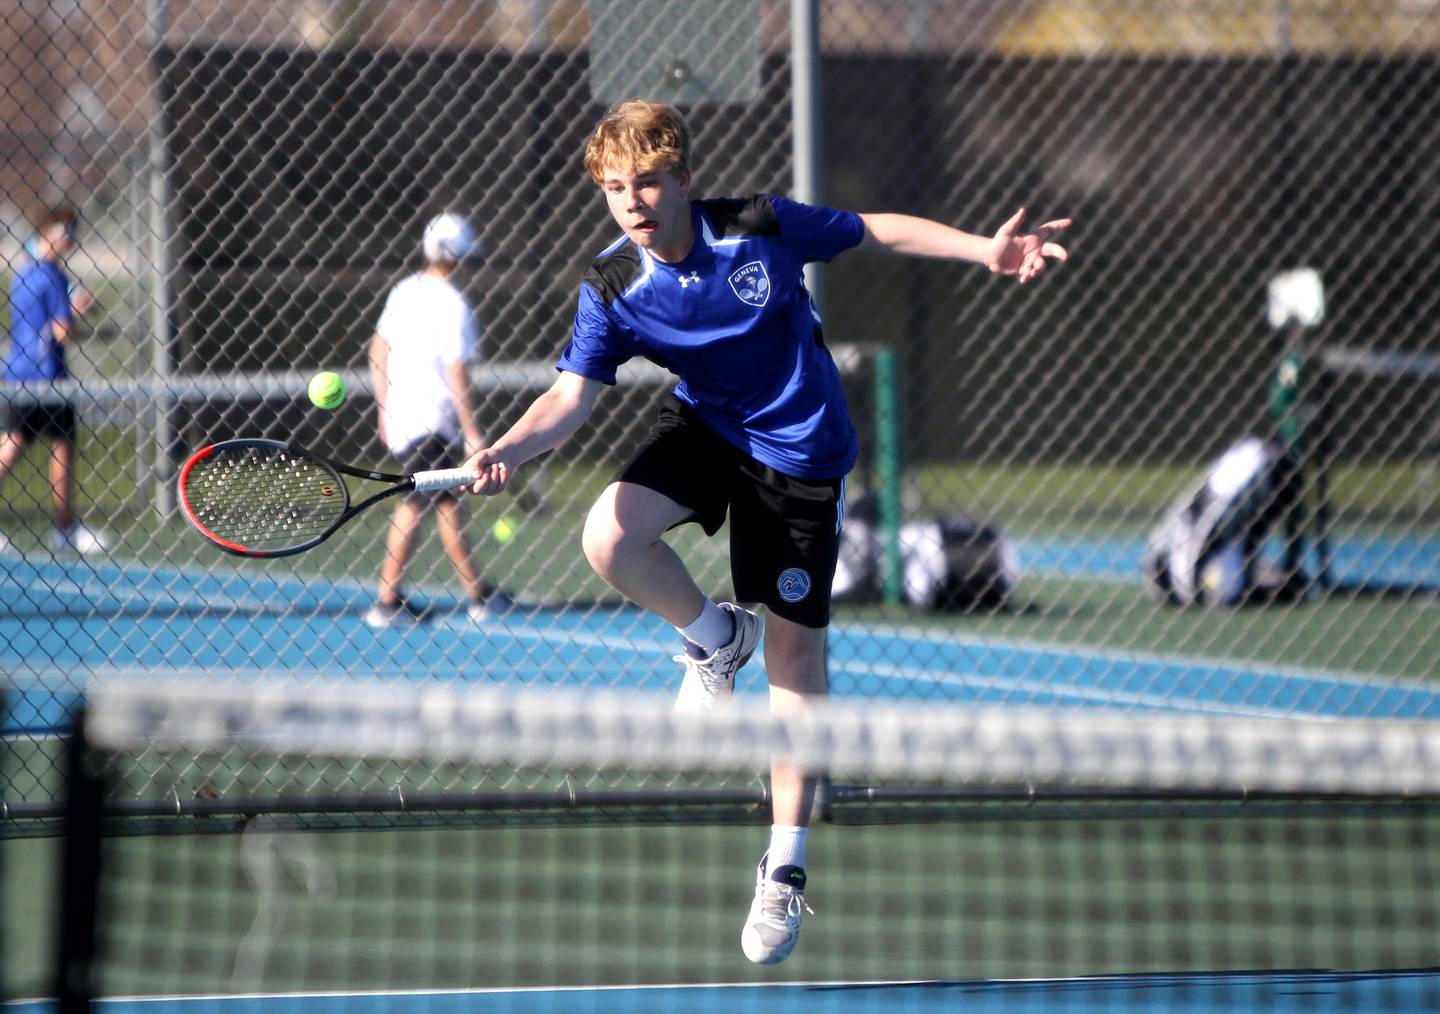 Geneva’s Tyler Masoncup returns the ball during a number one doubles match against St. Charles North with partner Ryan Cedergren (not pictured) on Thursday, April 21, 2022. Tyler, a freshman, is the son of St. Charles North Head Coach Sean Masoncup.